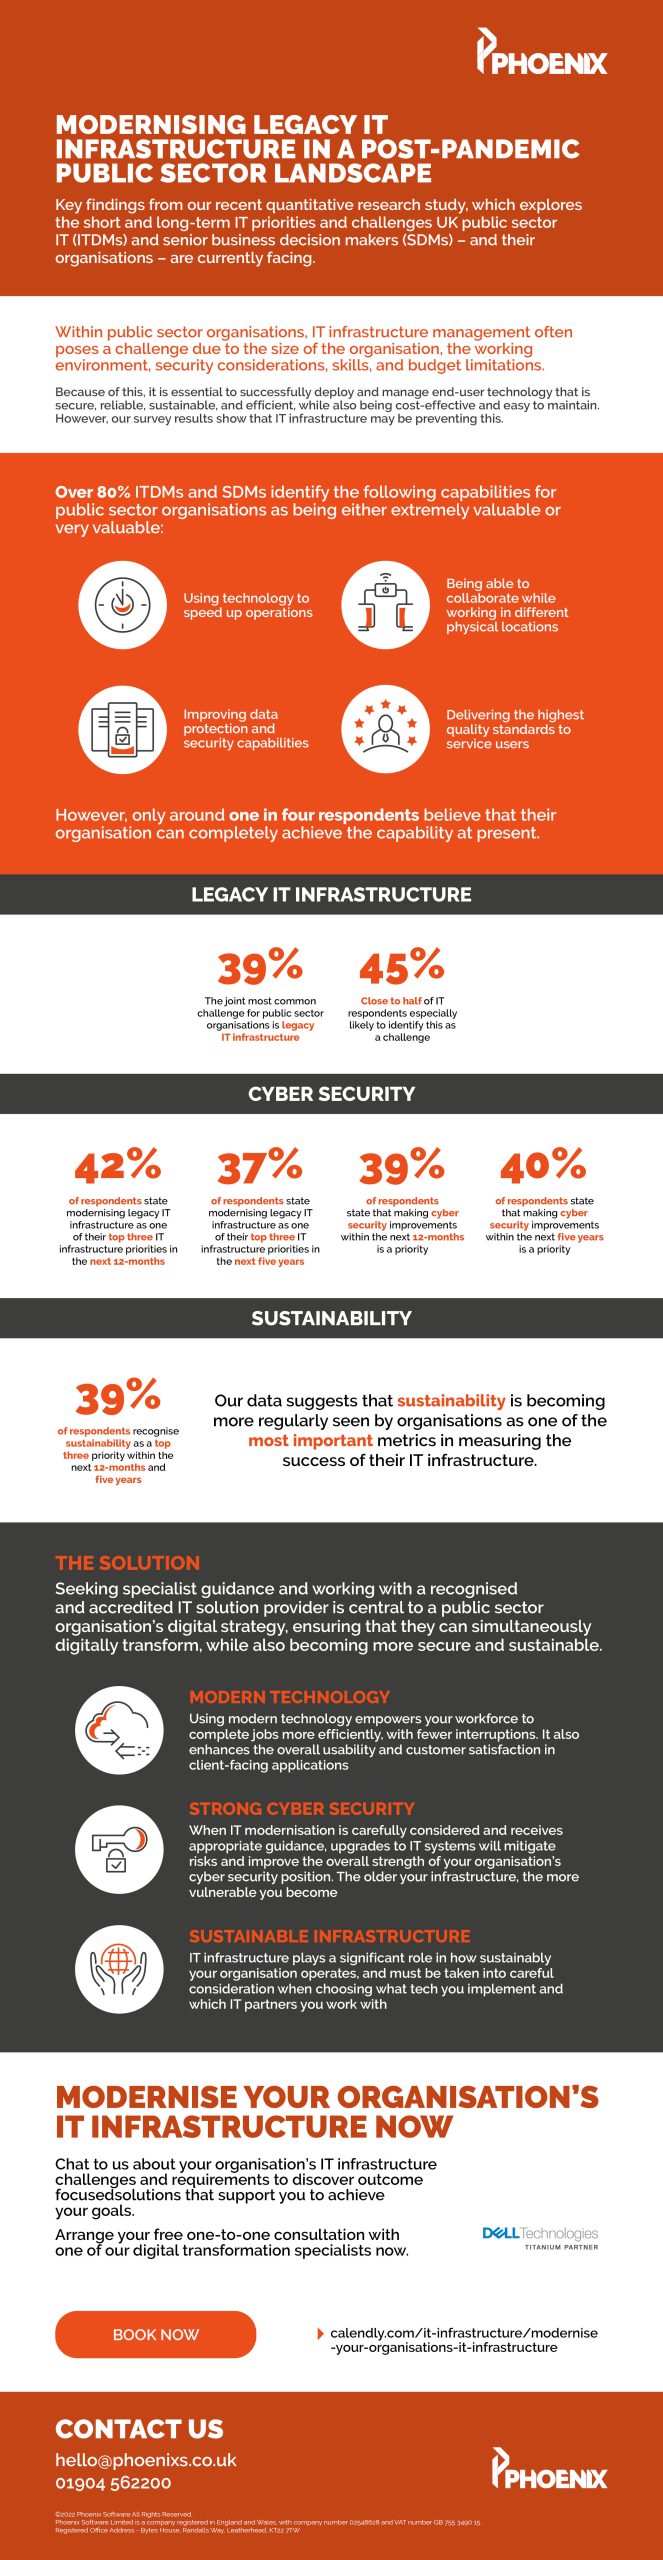 Modernising legacy IT infrastructure in a post-pandemic public sector landscape - Infographic Image